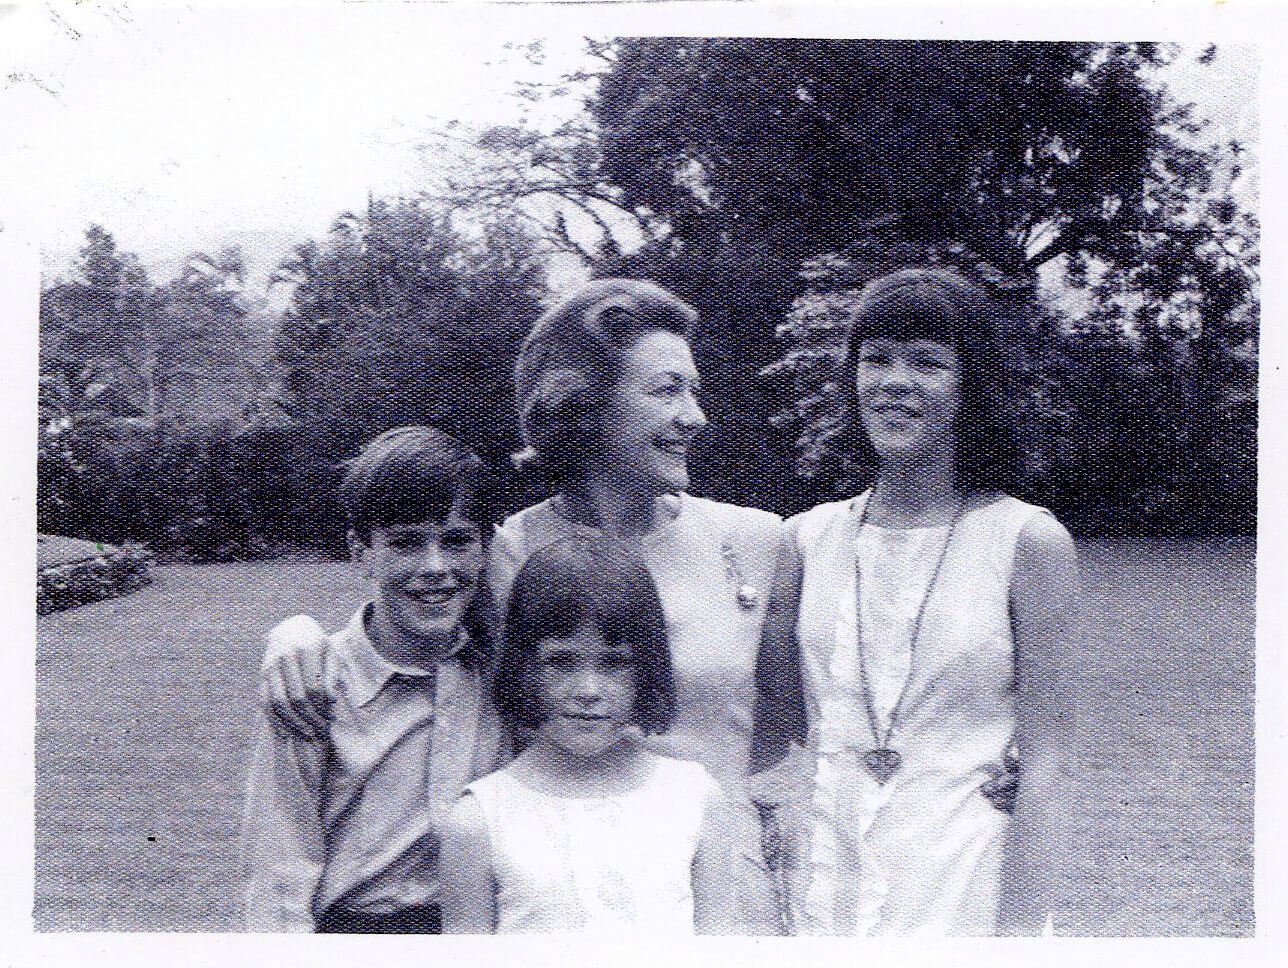 David's wife Penny with their three children